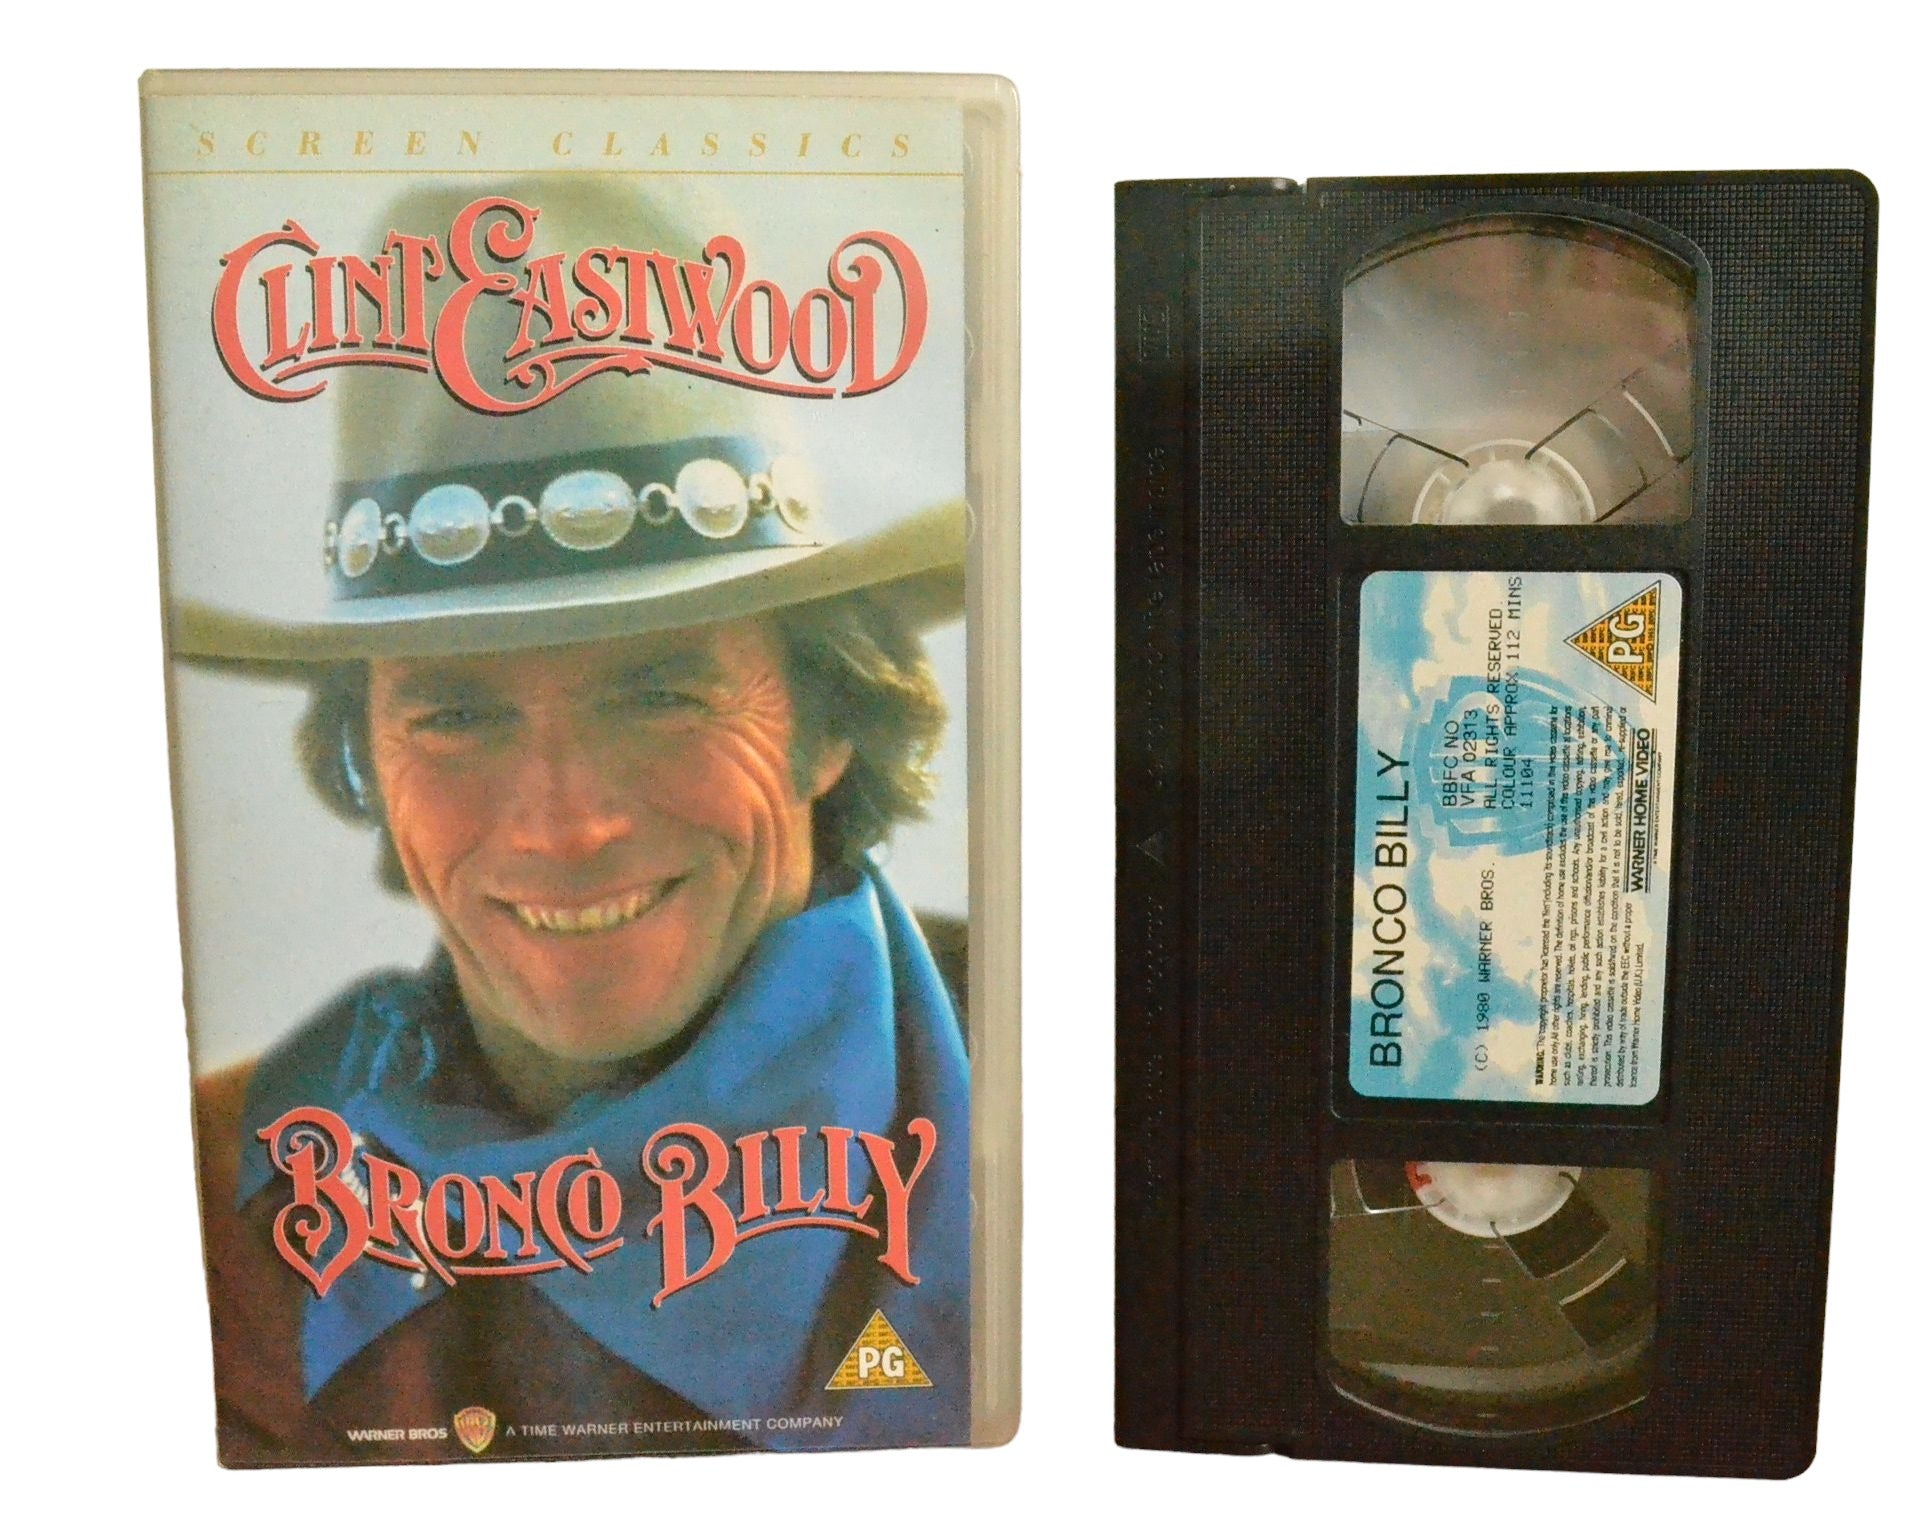 Bronco Billy (Clint Eastwood) - Clint Eastwood - Warner Home Video - VFA02313 - Action - Pal - VHS-